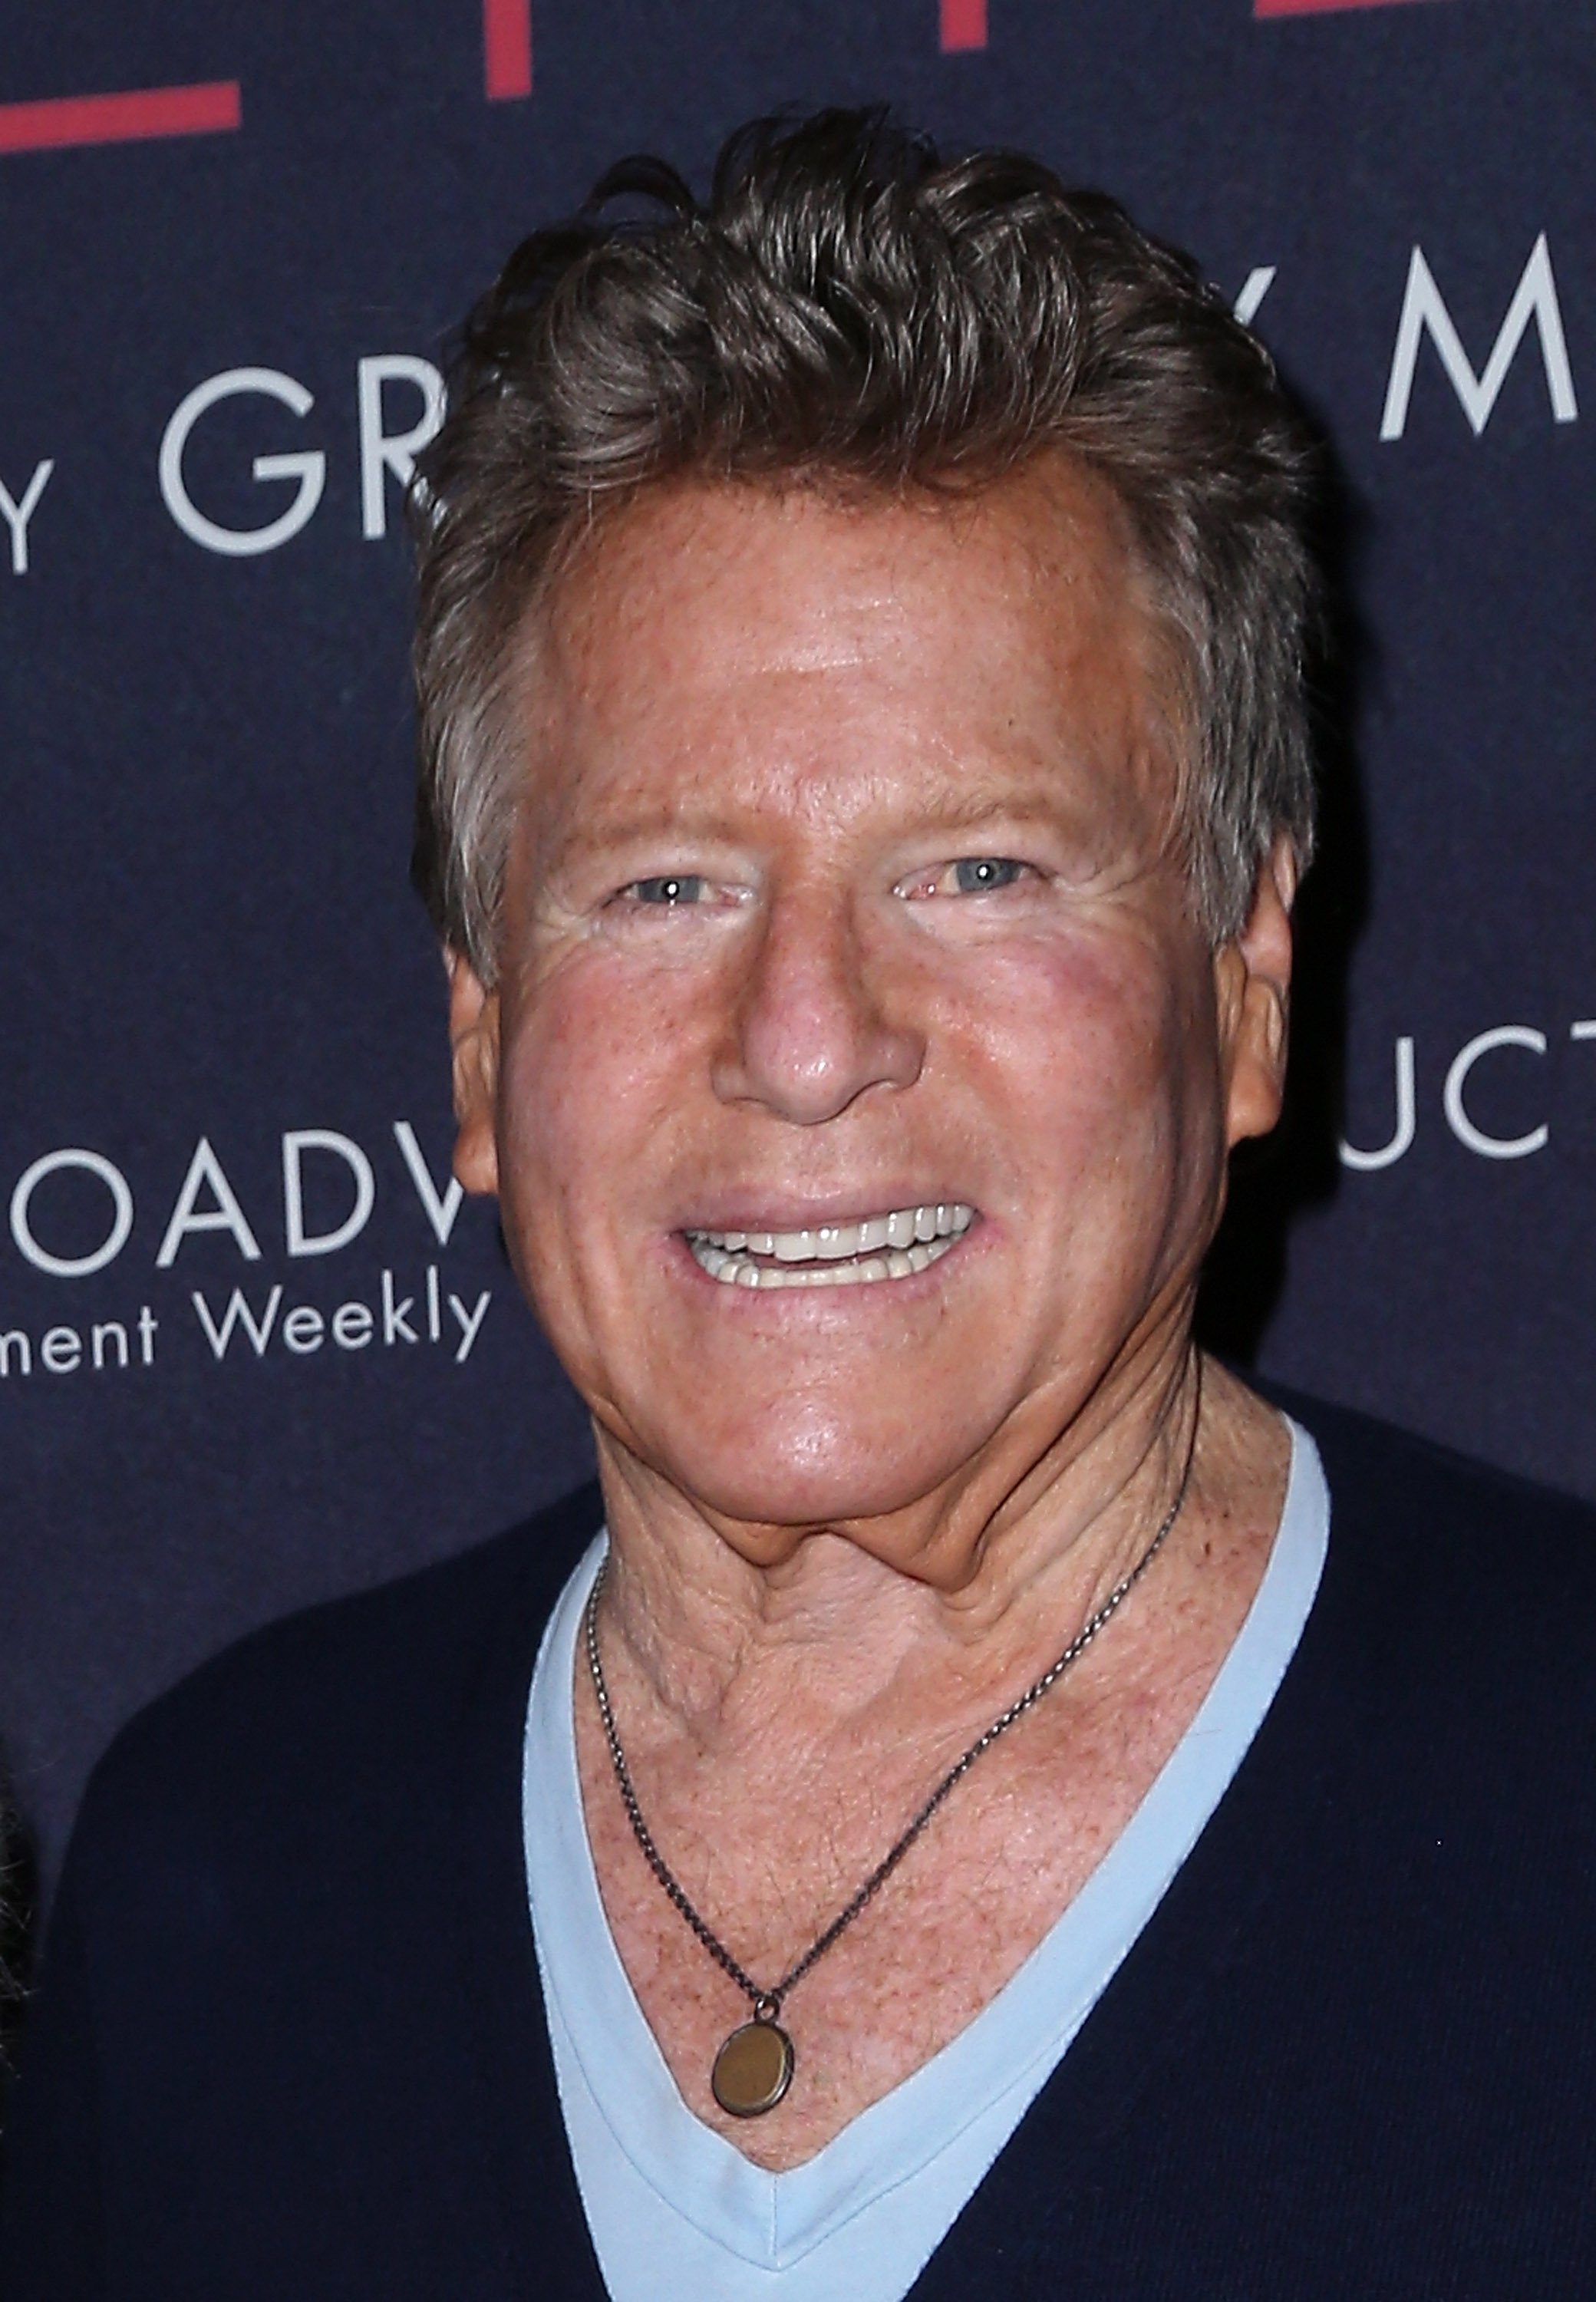 Actor Ryan O'Neal attends the curtain call for "Love Letters" at the Wallis Annenberg Center for the Performing Arts on October 14, 2015 in Beverly Hills, California.  | Source: Getty Images